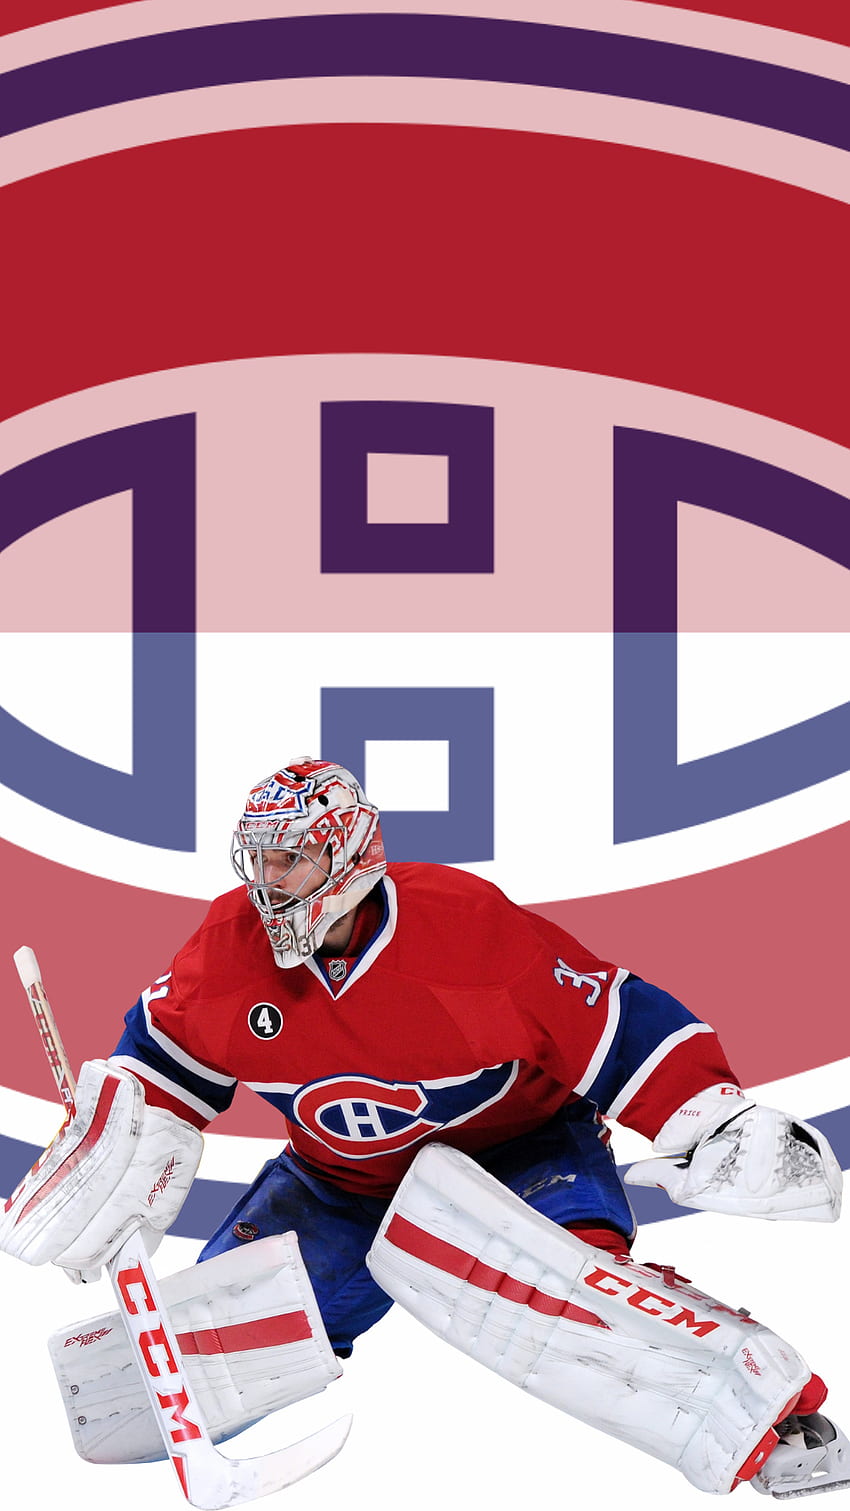 Noah Vandal on X: The Montreal Canadiens have never really been